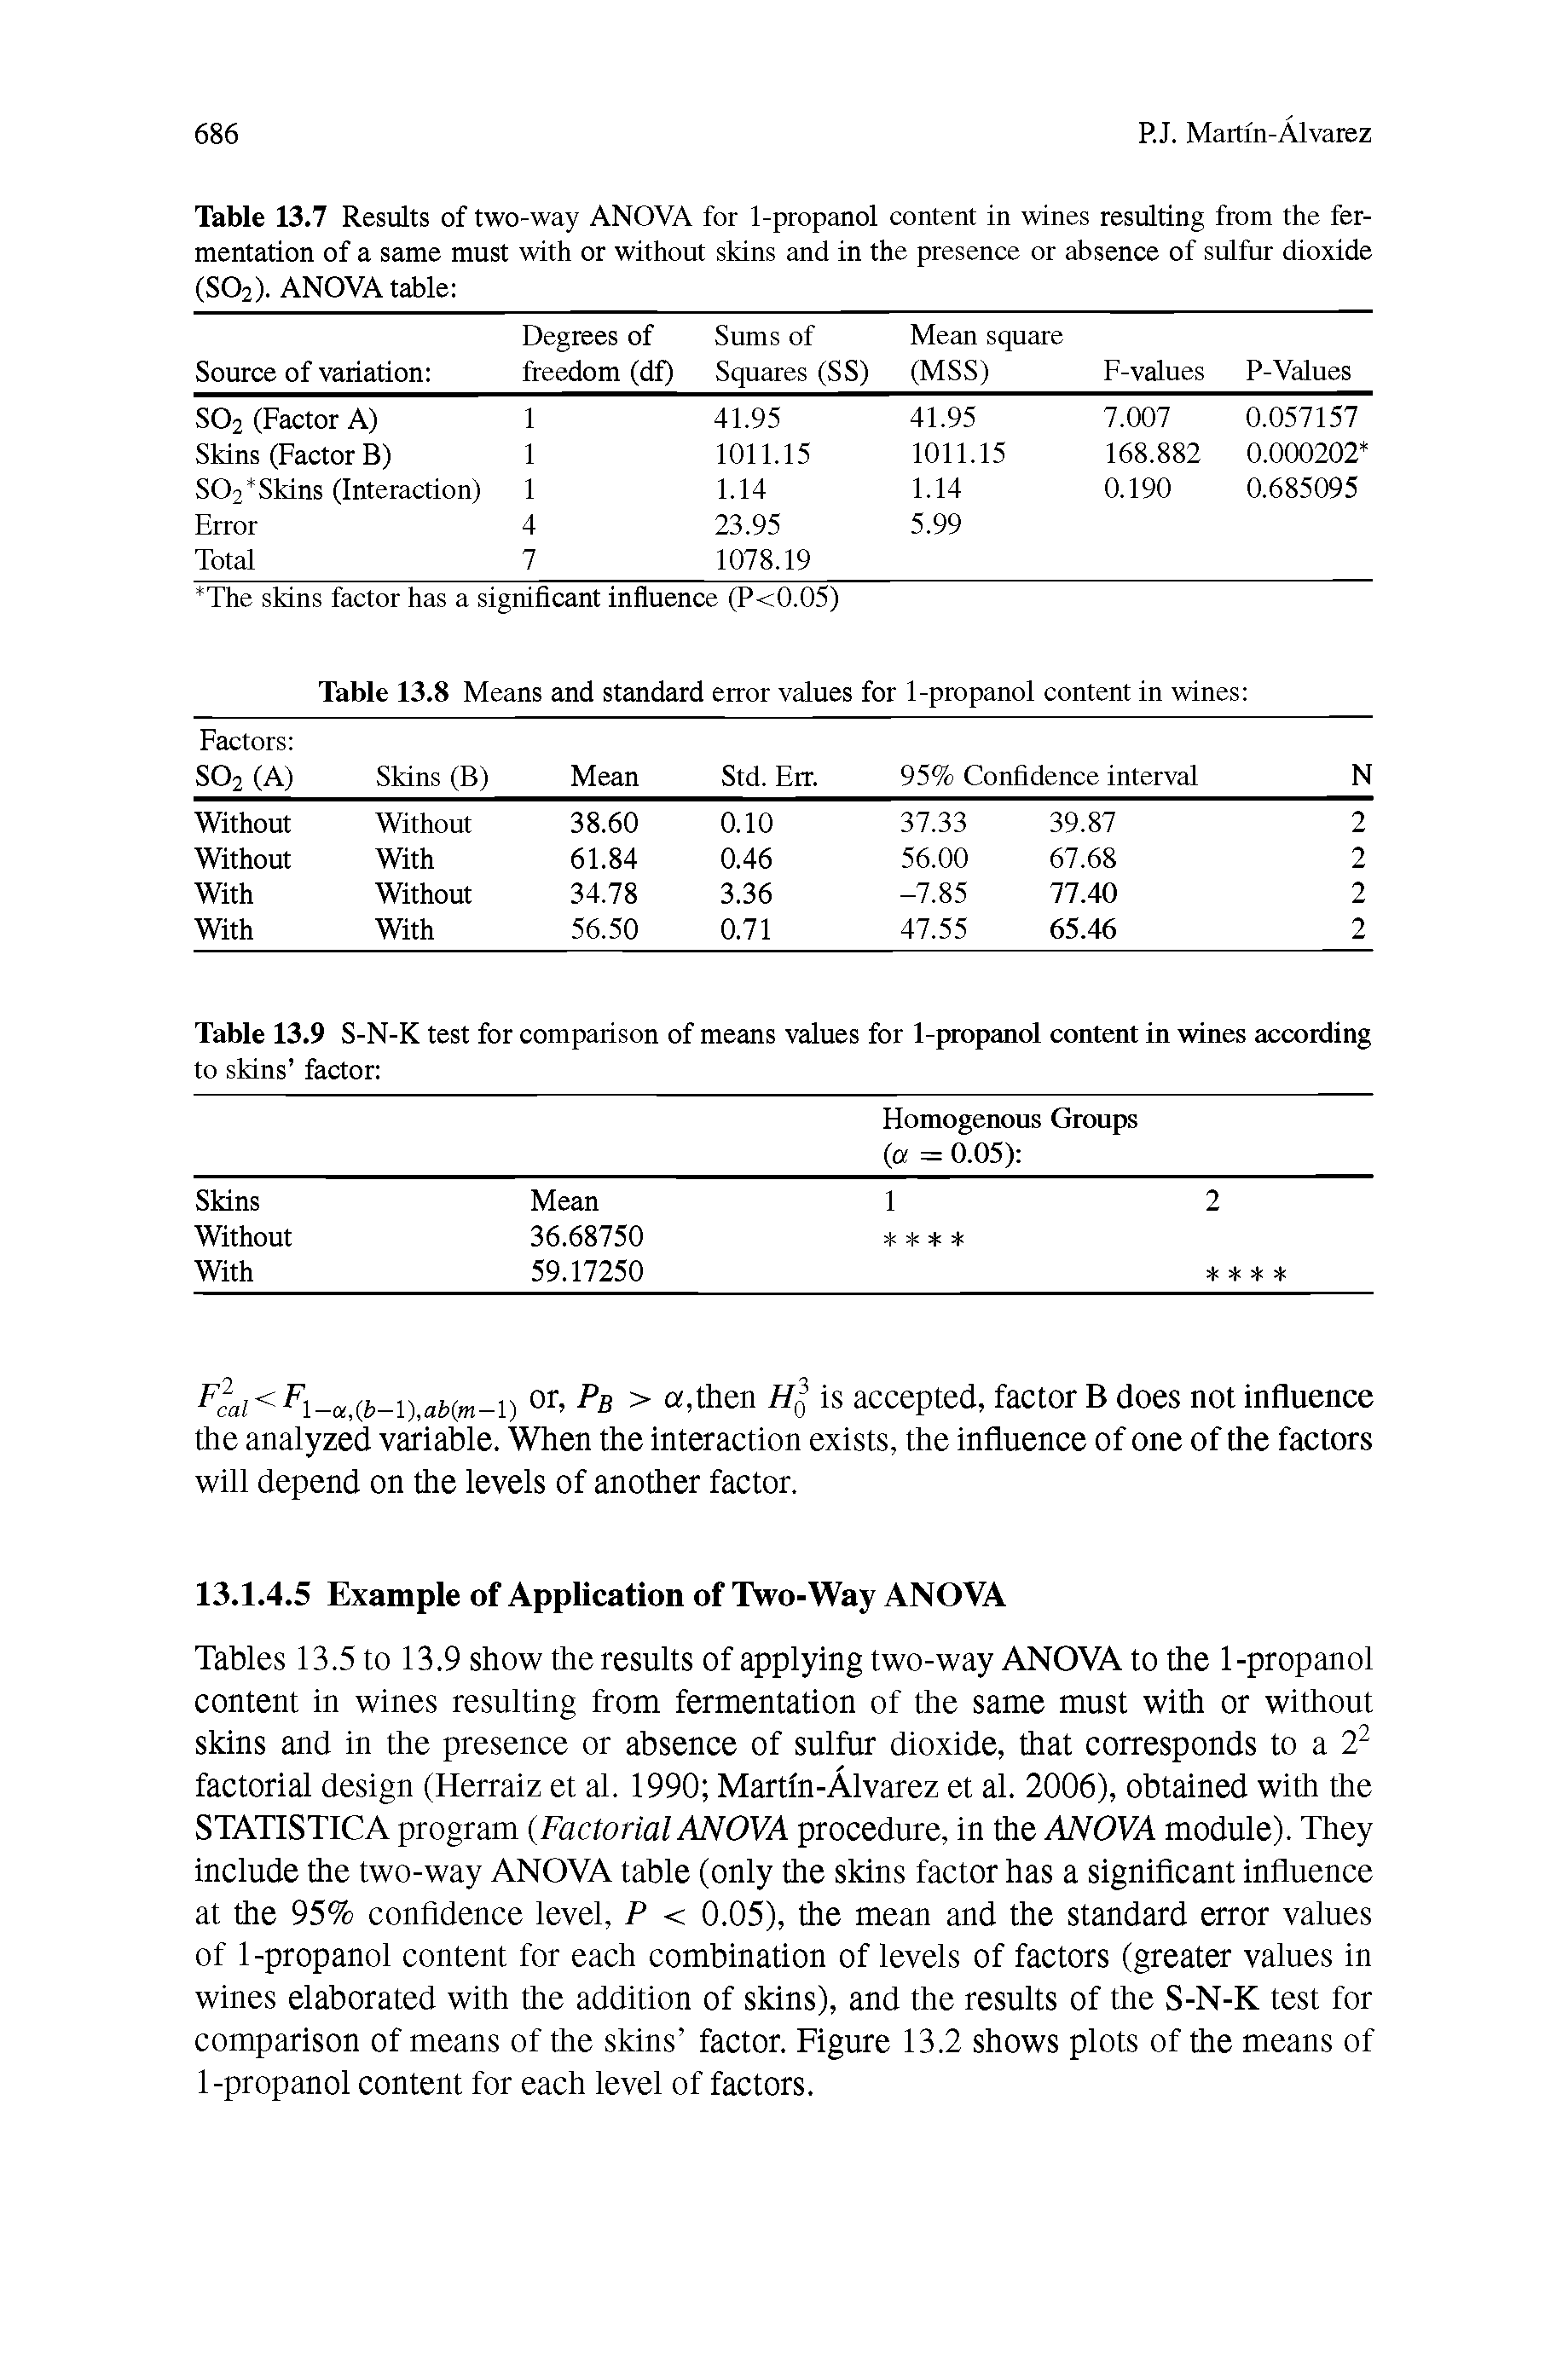 Tables 13.5 to 13.9 show the results of applying two-way ANOVA to the 1-propanol content in wines resulting from fermentation of the same must with or without skins and in the presence or absence of sulfur dioxide, that corresponds to a 7 factorial design (Herraiz et al. 1990 Martln-Alvarez et al. 2006), obtained with the STATISTICA program (Factorial ANOVA procedure, in the ANOVA module). They include the two-way ANOVA table (only the skins factor has a significant influence at the 95% confidence level, P < 0.05), the mean and the standard error values of 1-propanol content for each combination of levels of factors (greater values in wines elaborated with the addition of skins), and the results of the S-N-K test for comparison of means of the skins factor. Figure 13.2 shows plots of the means of 1-propanol content for each level of factors.